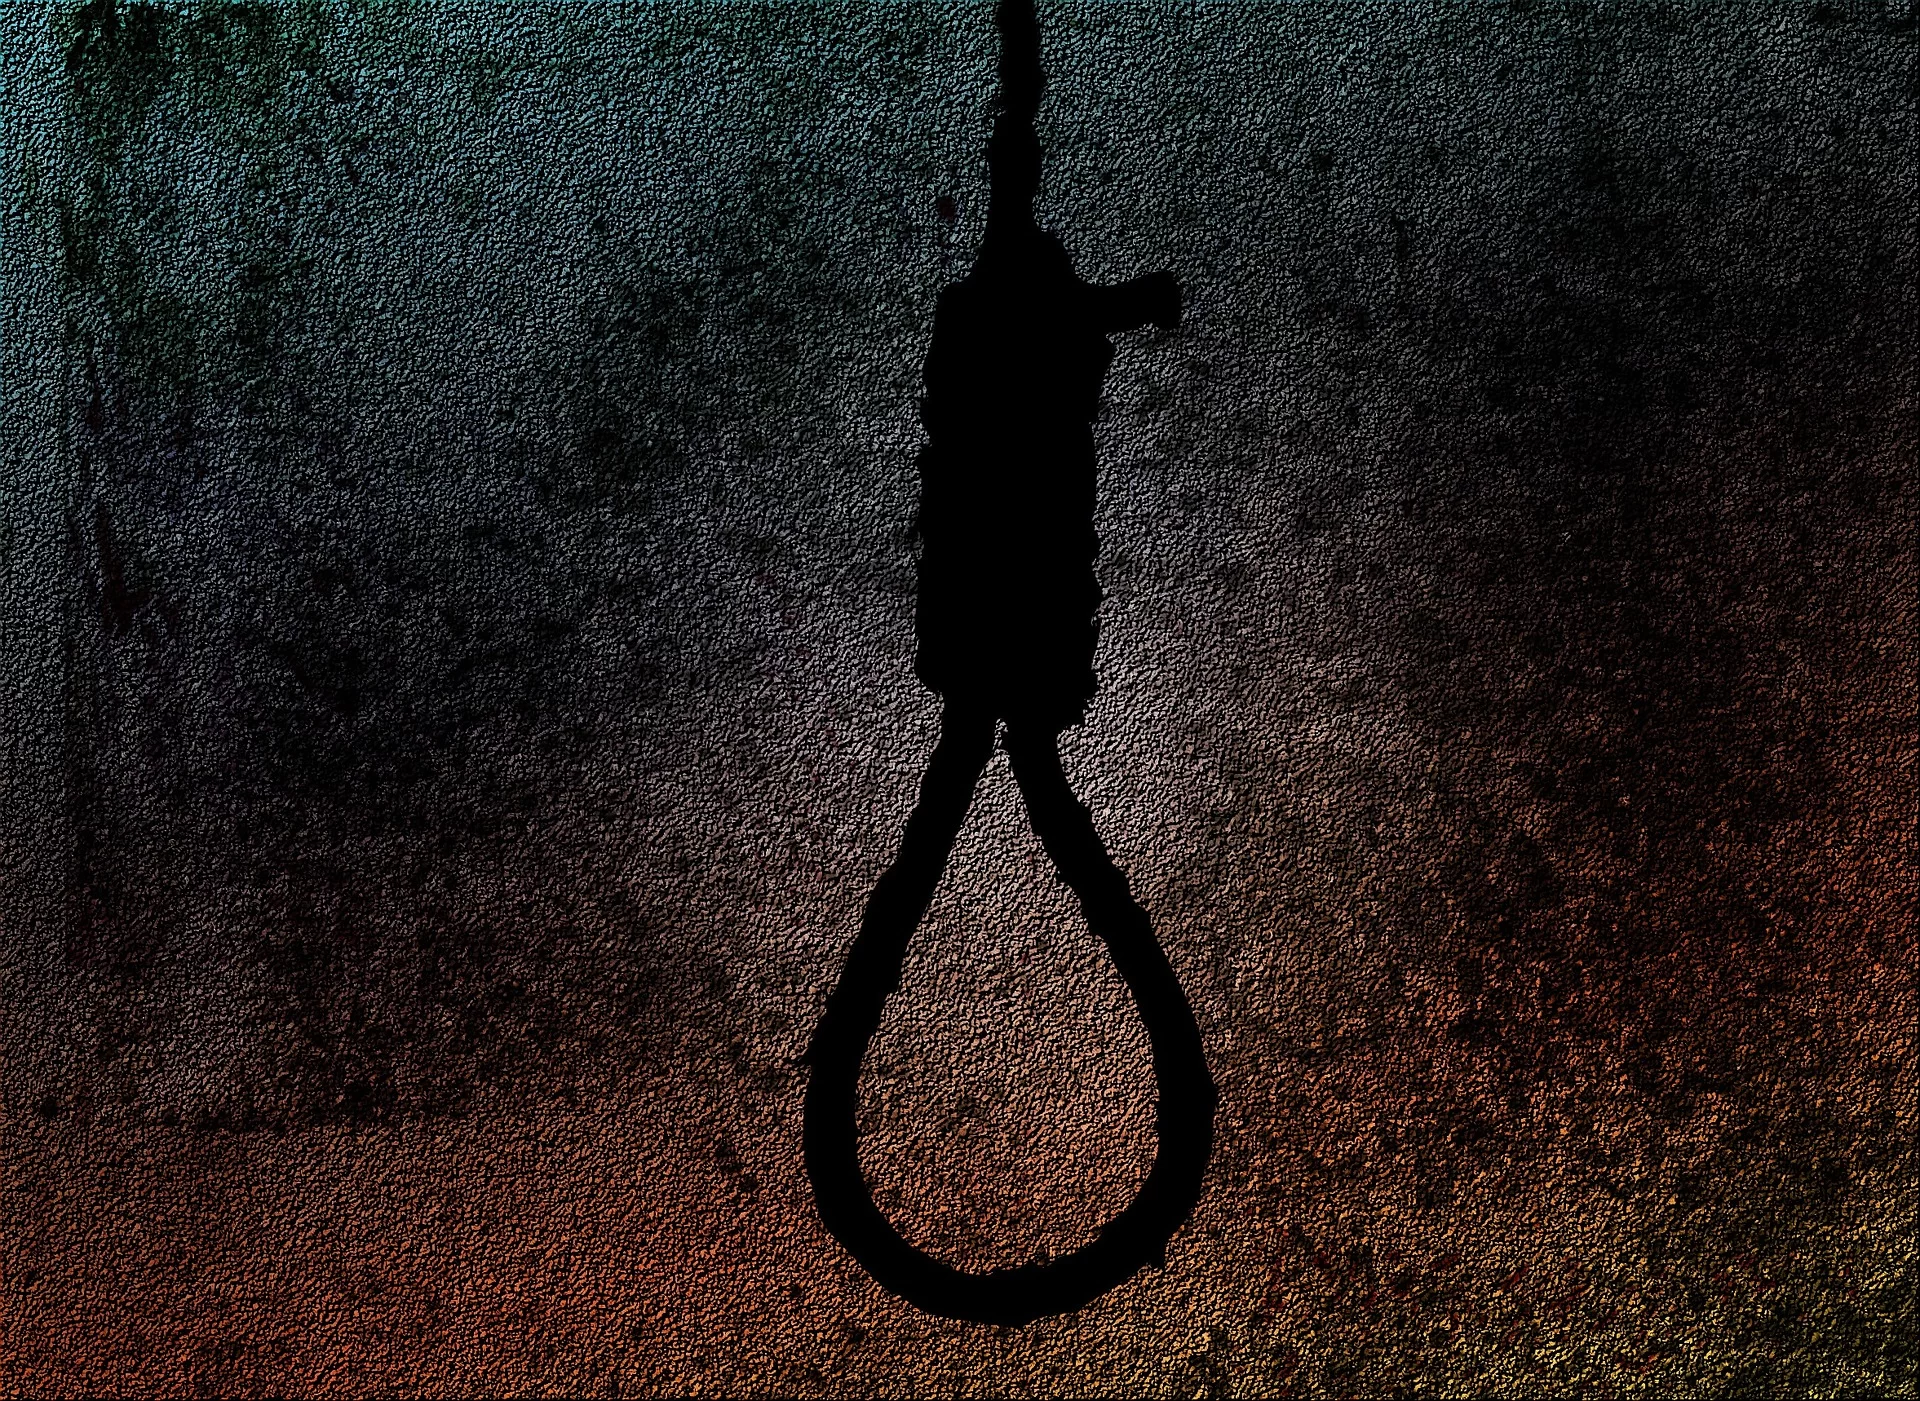 Couple commits suicide, loss in business suspected